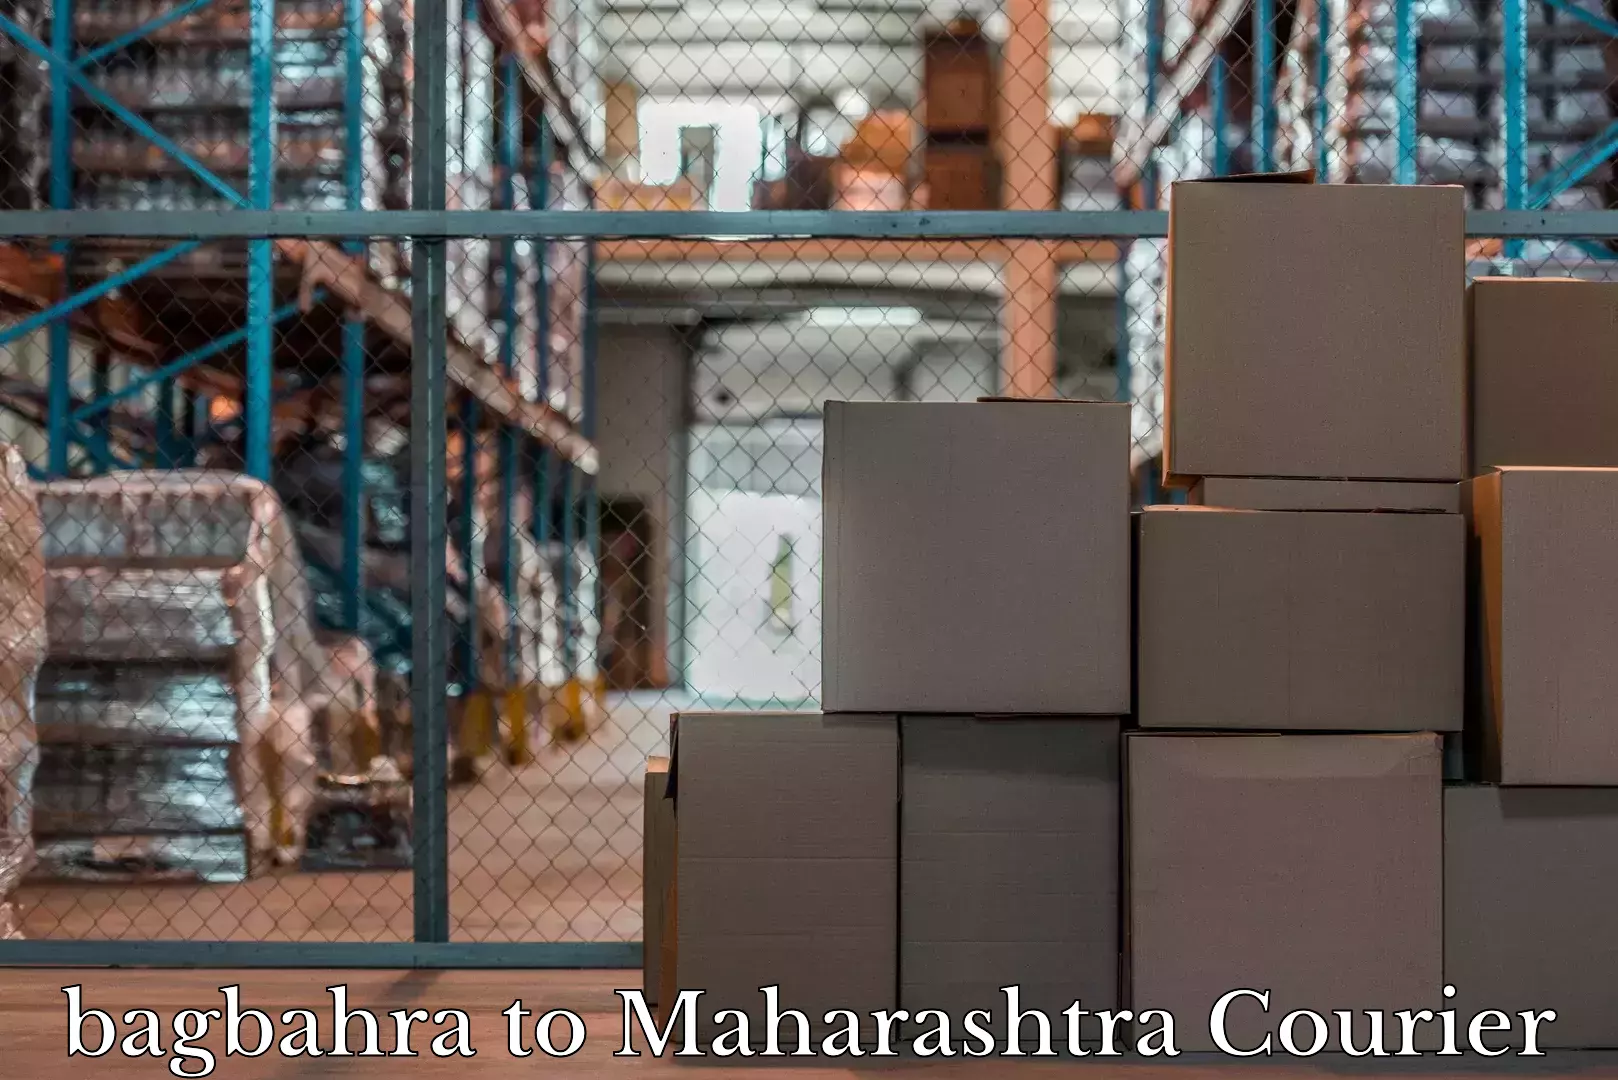 Baggage courier service bagbahra to Chembur